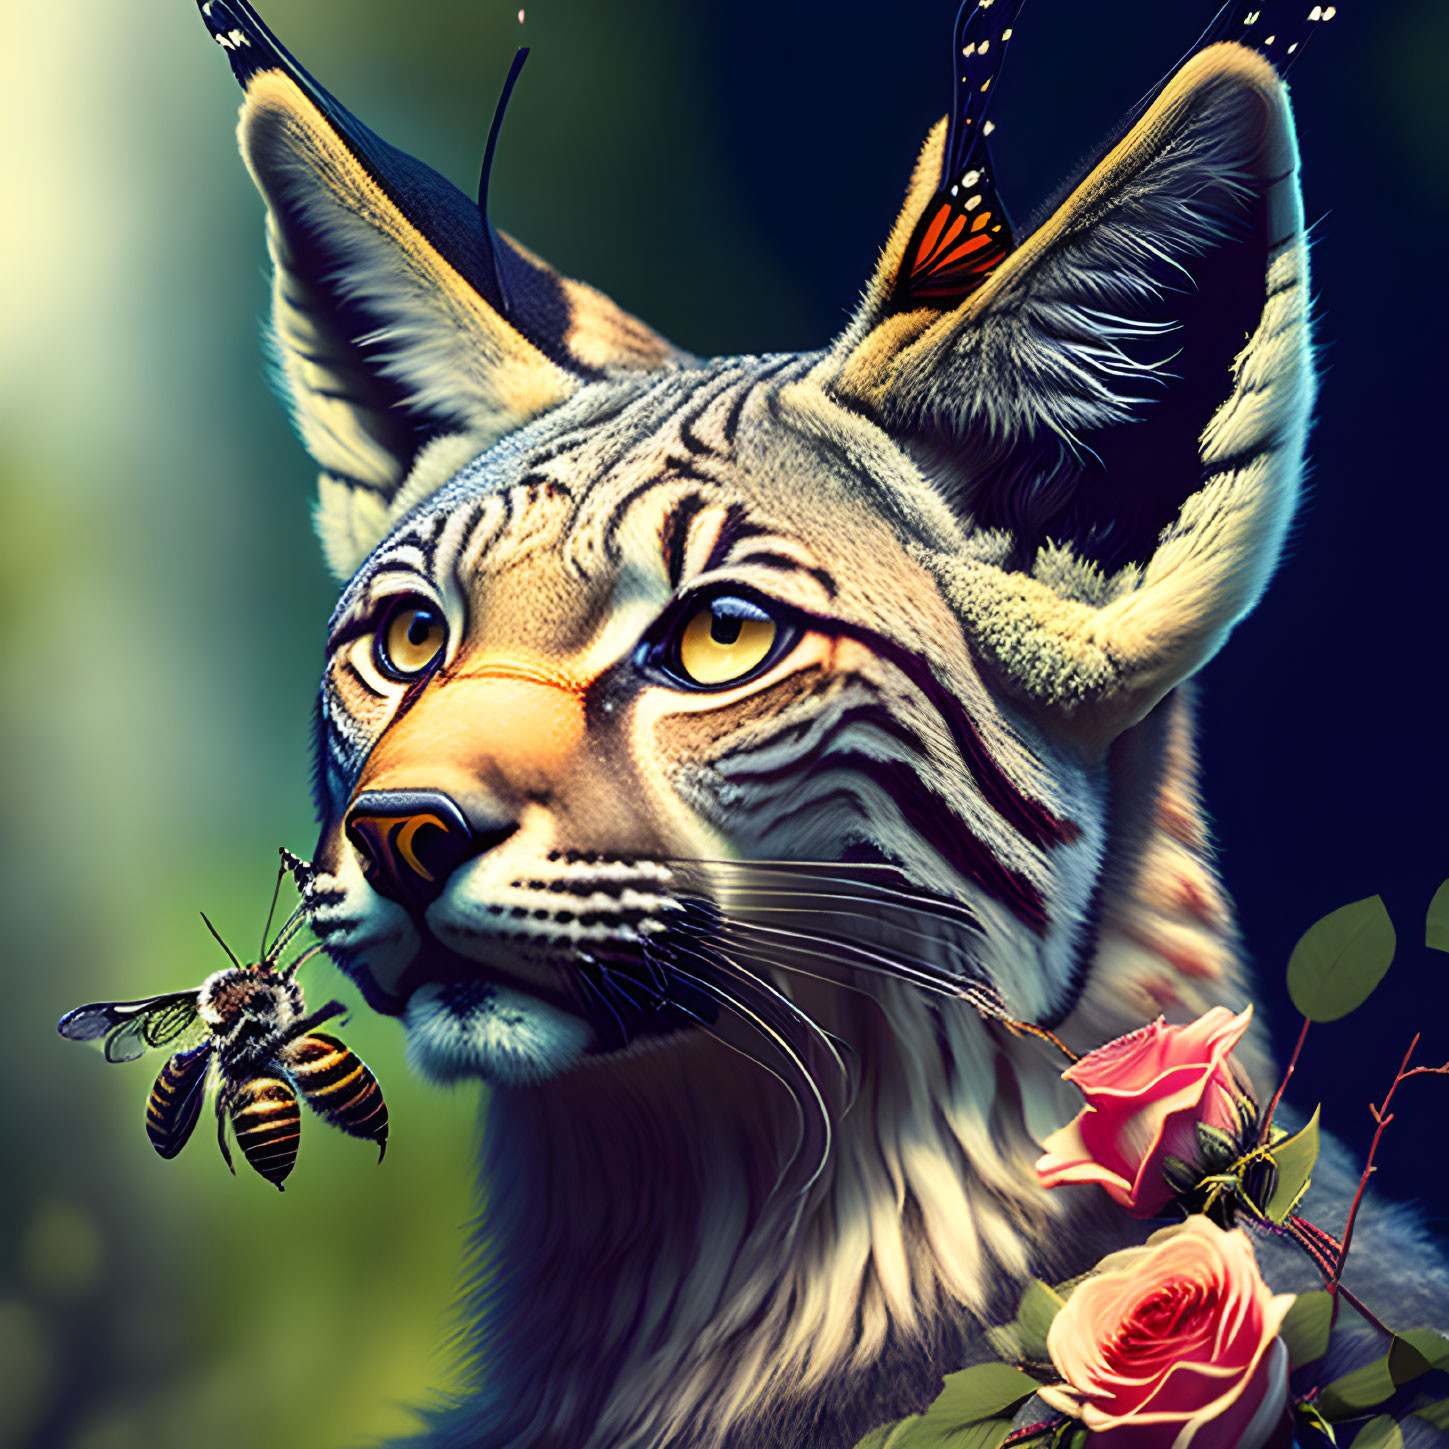 Digital illustration: Lynx head with butterfly antennae, bees, roses, and lush foliage.